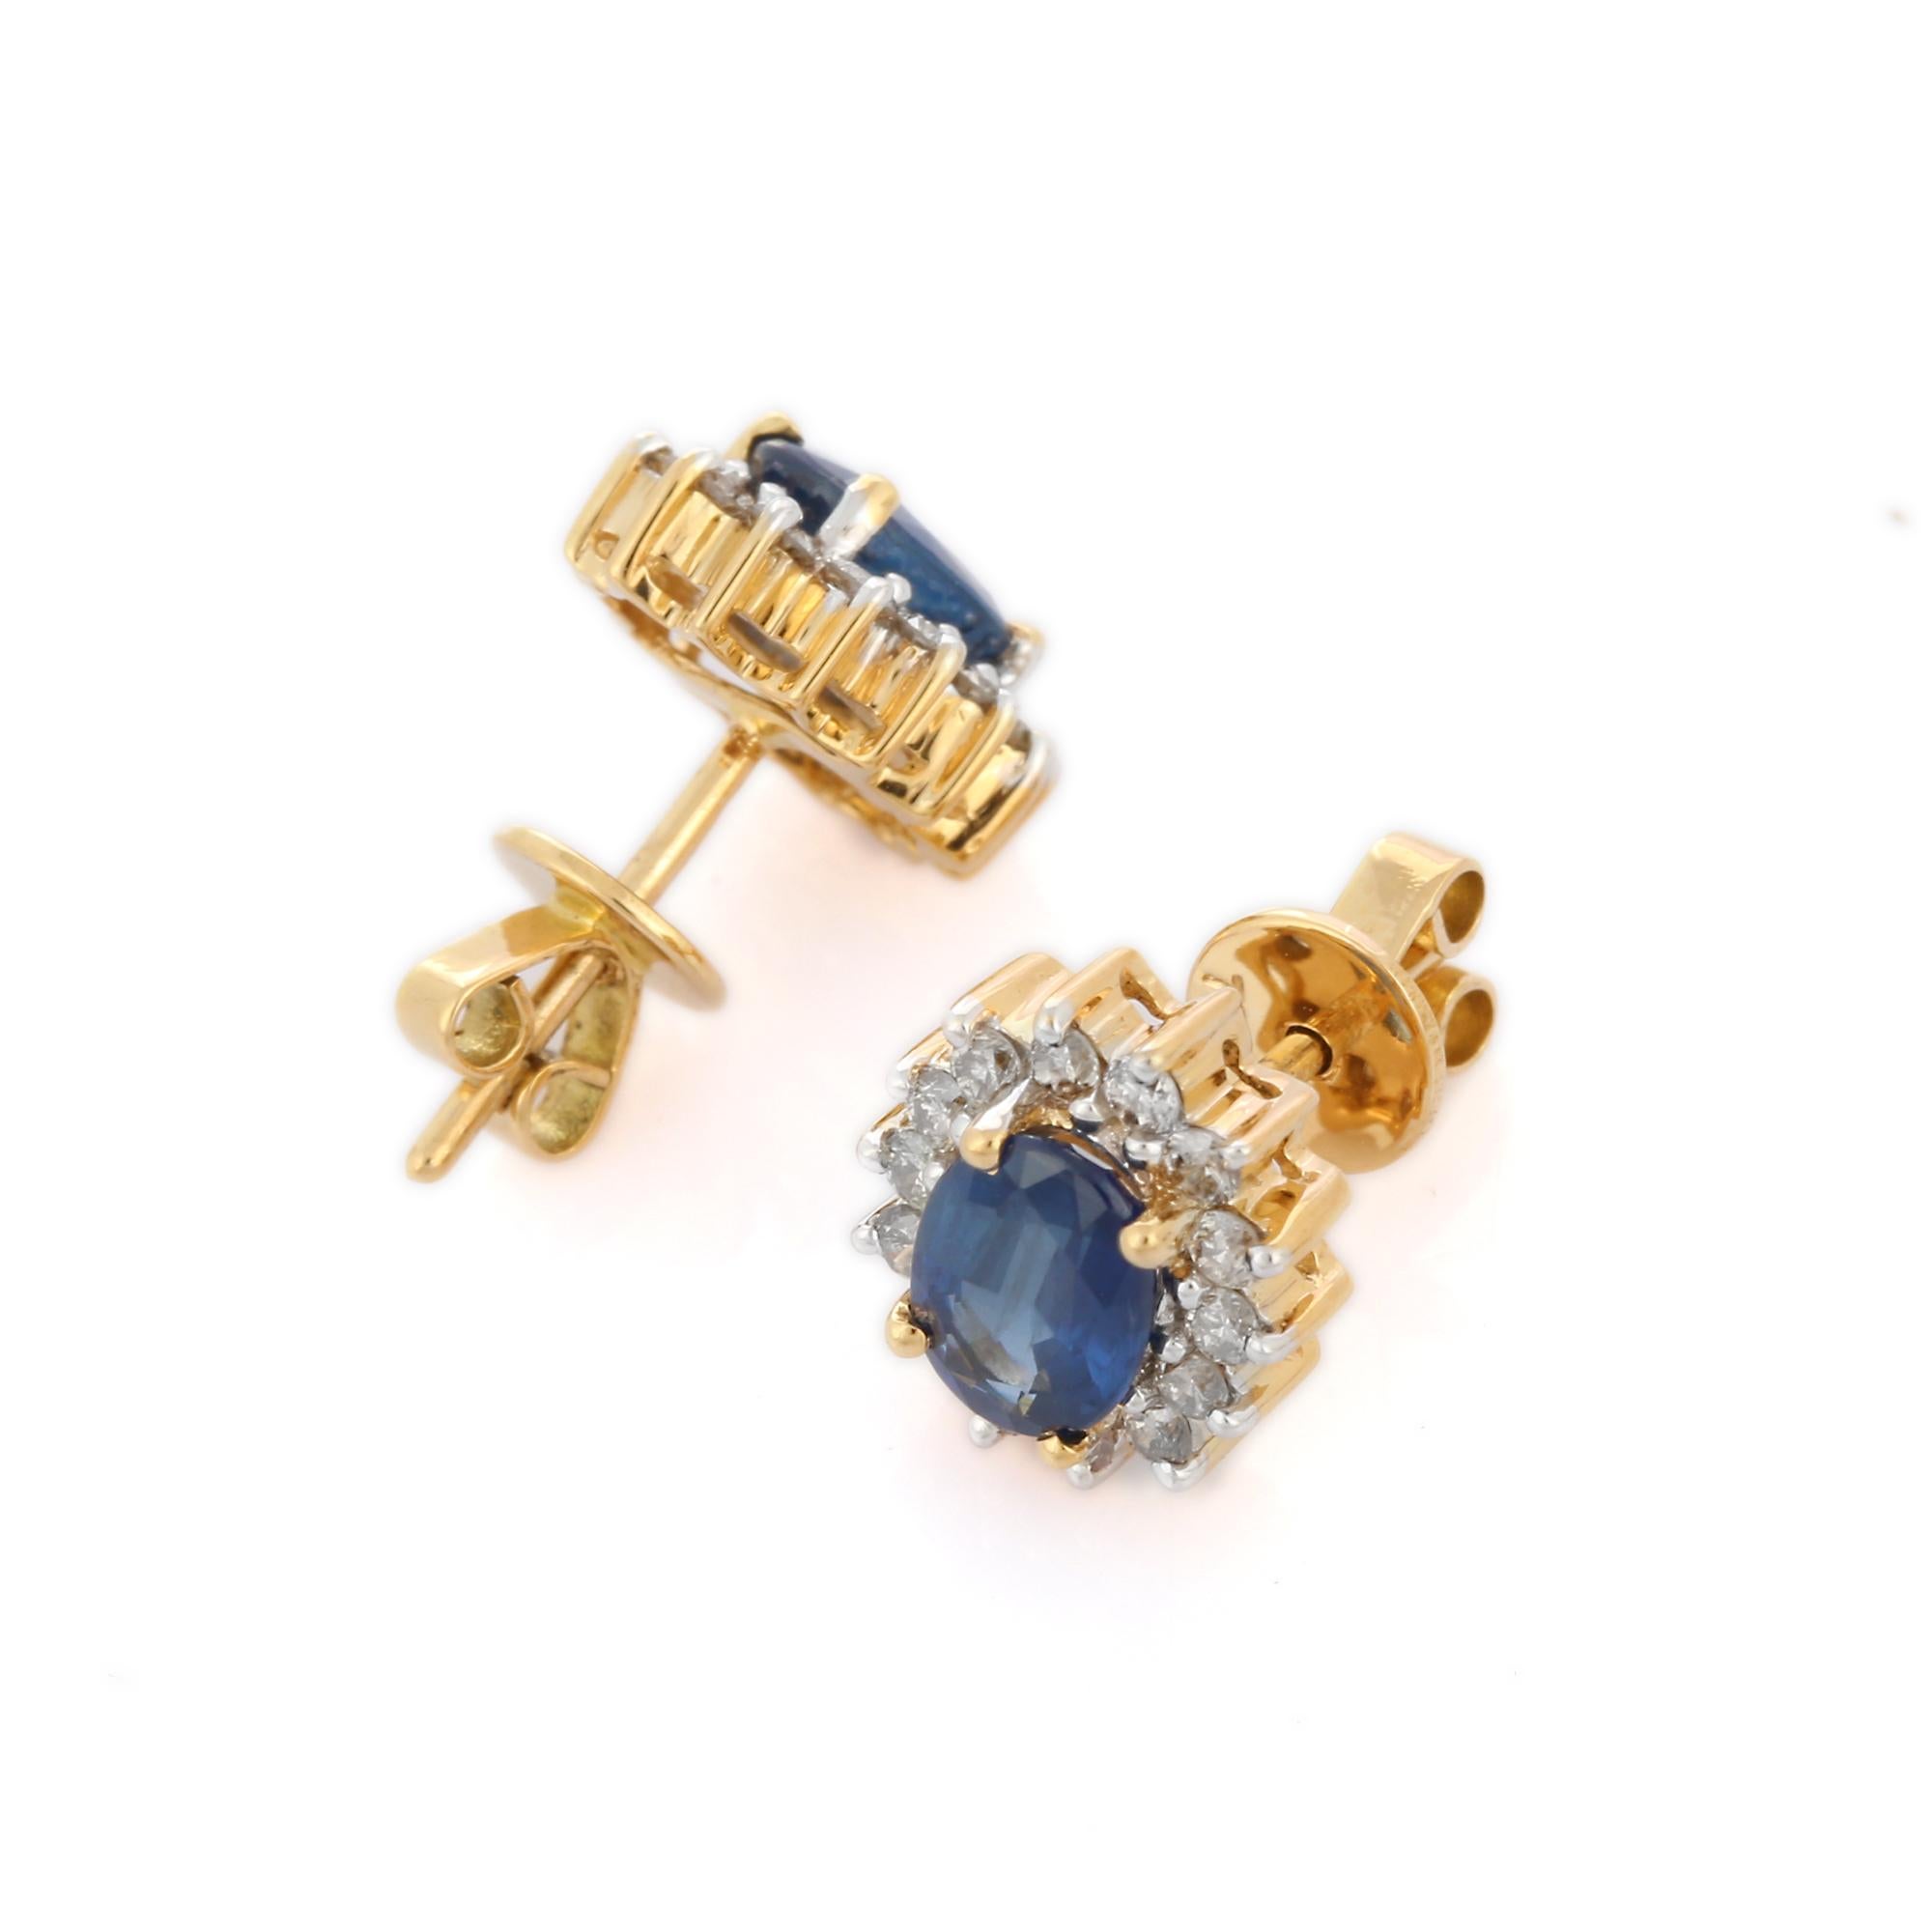 Modern 1.58 Carat Blue Sapphire and Diamond Earrings Studded in 18K Solid Yellow Gold For Sale